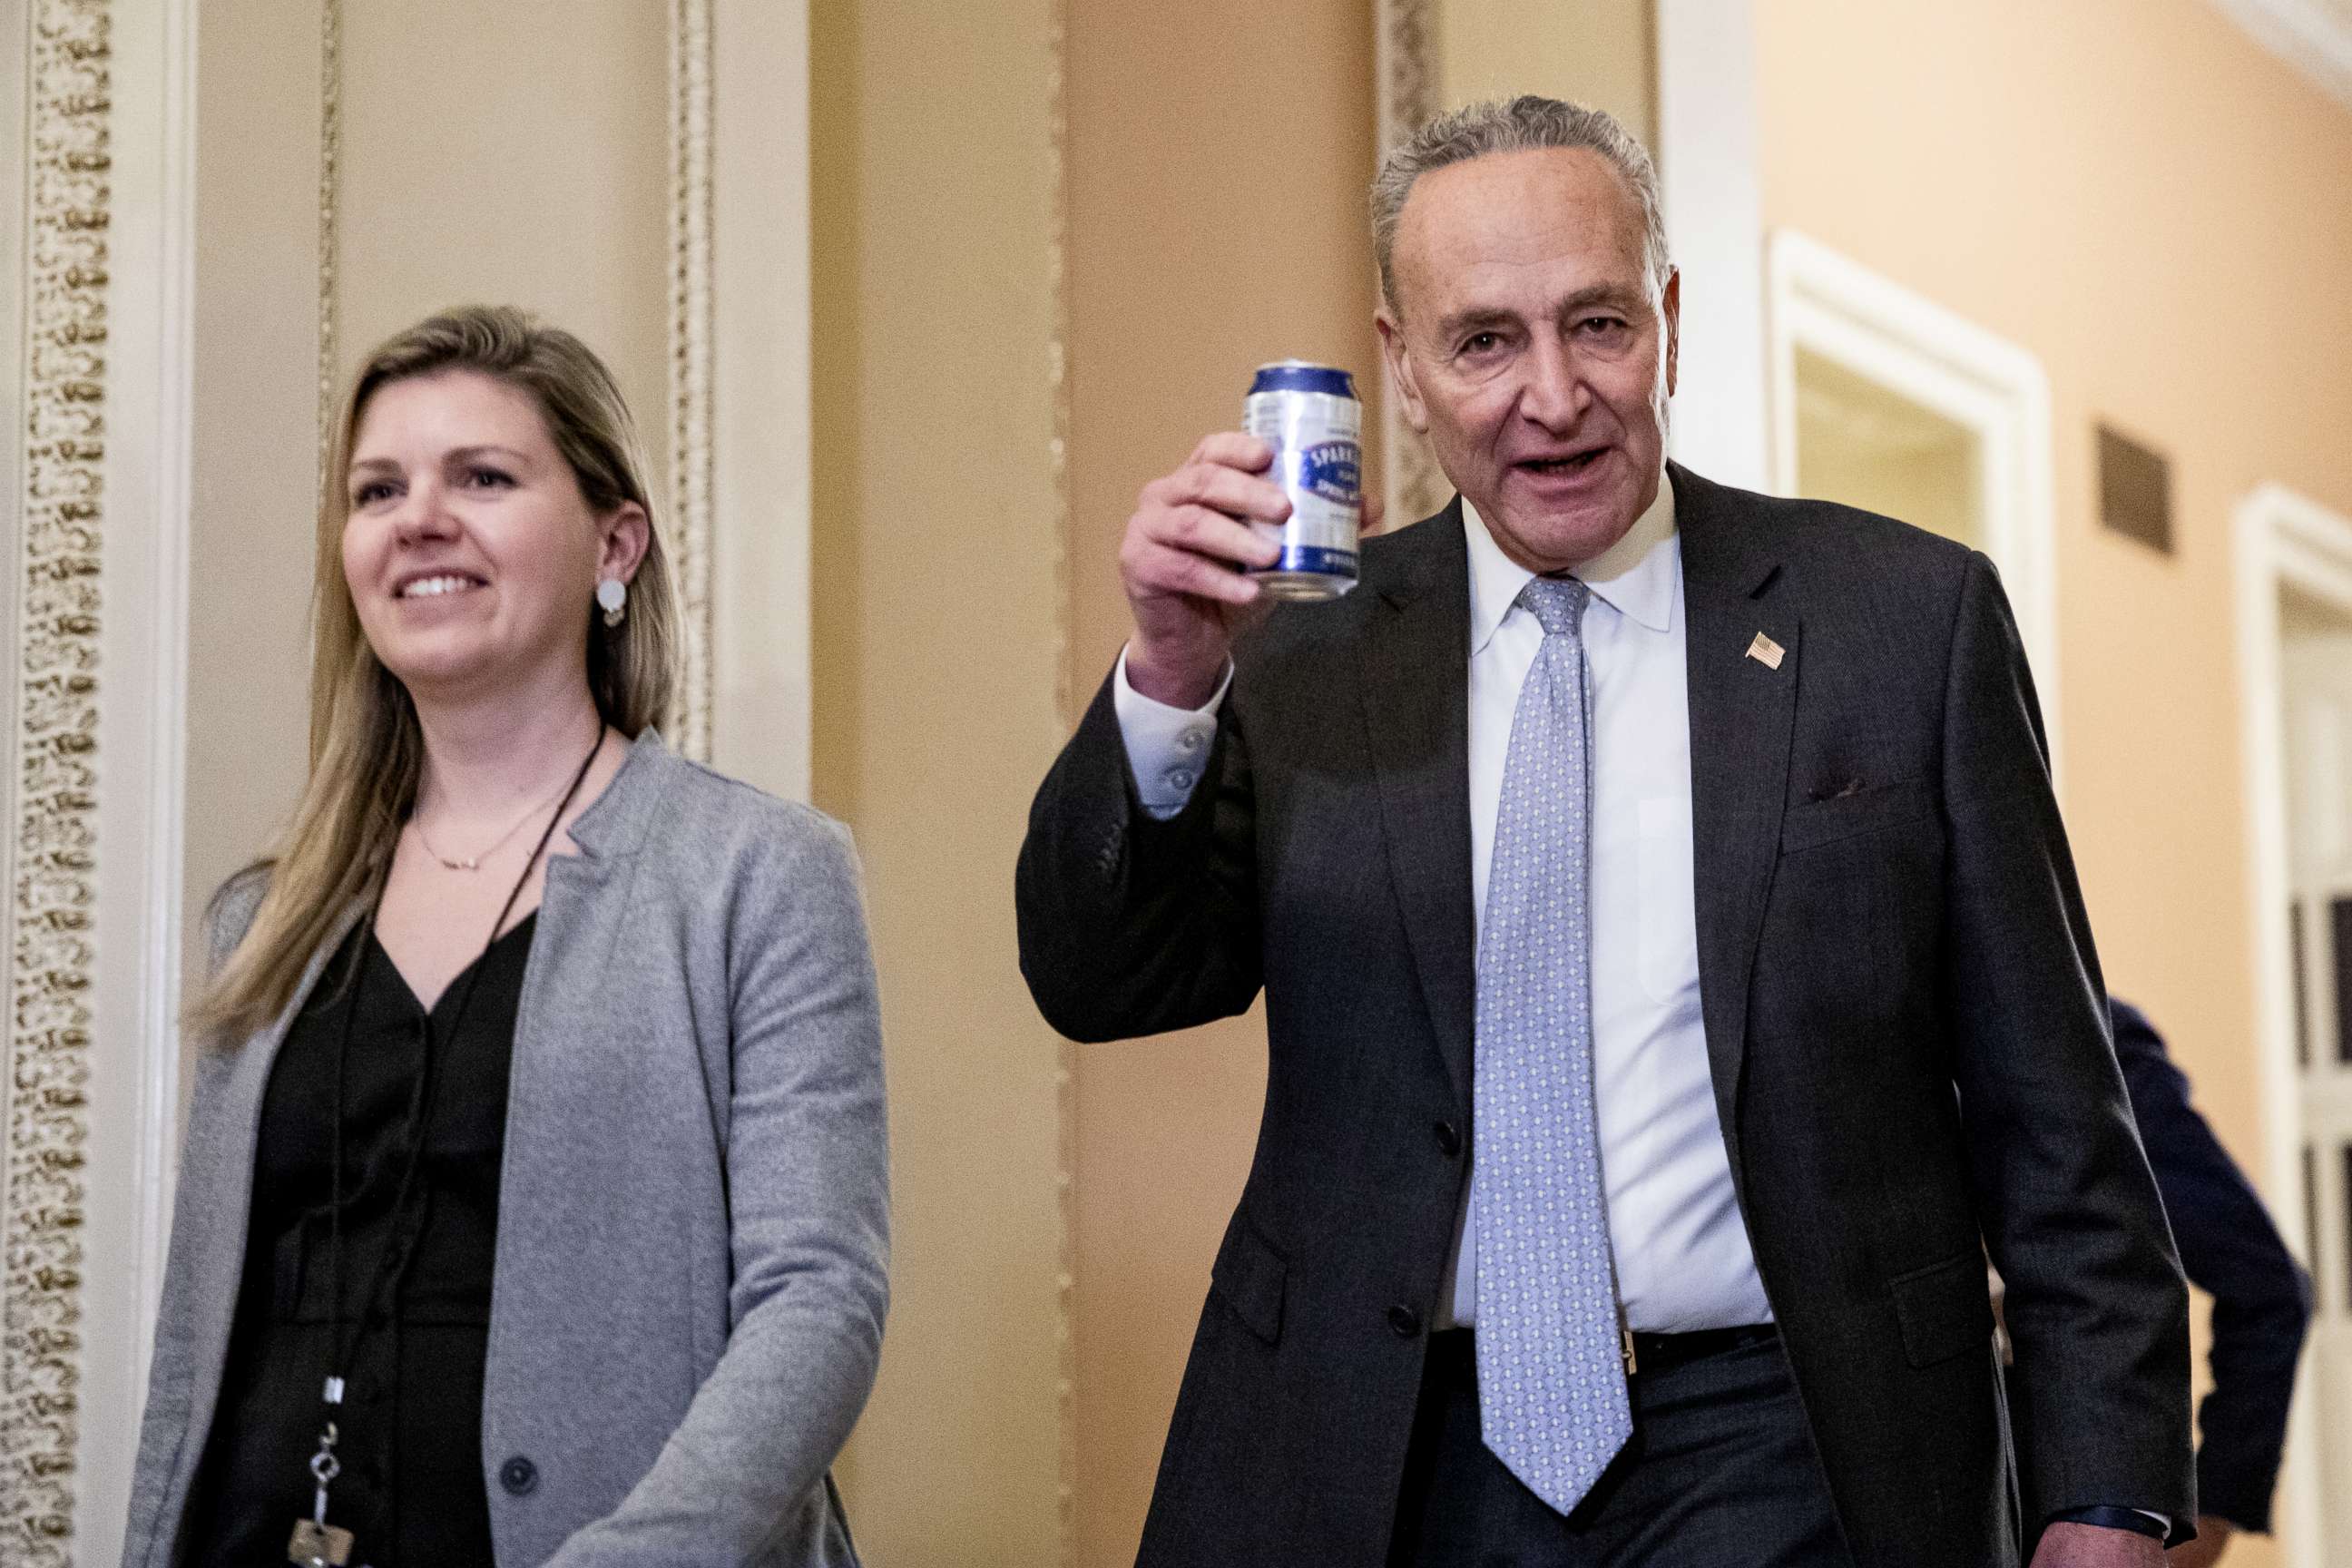 PHOTO: Chuck Schumer cheers press photographers saying, "Here's to a fair trial!" as he walks back to the Senate floor following a dinner recess in the Senate impeachment trial of President Donald Trump, Jan. 23, 2020, in Washington.